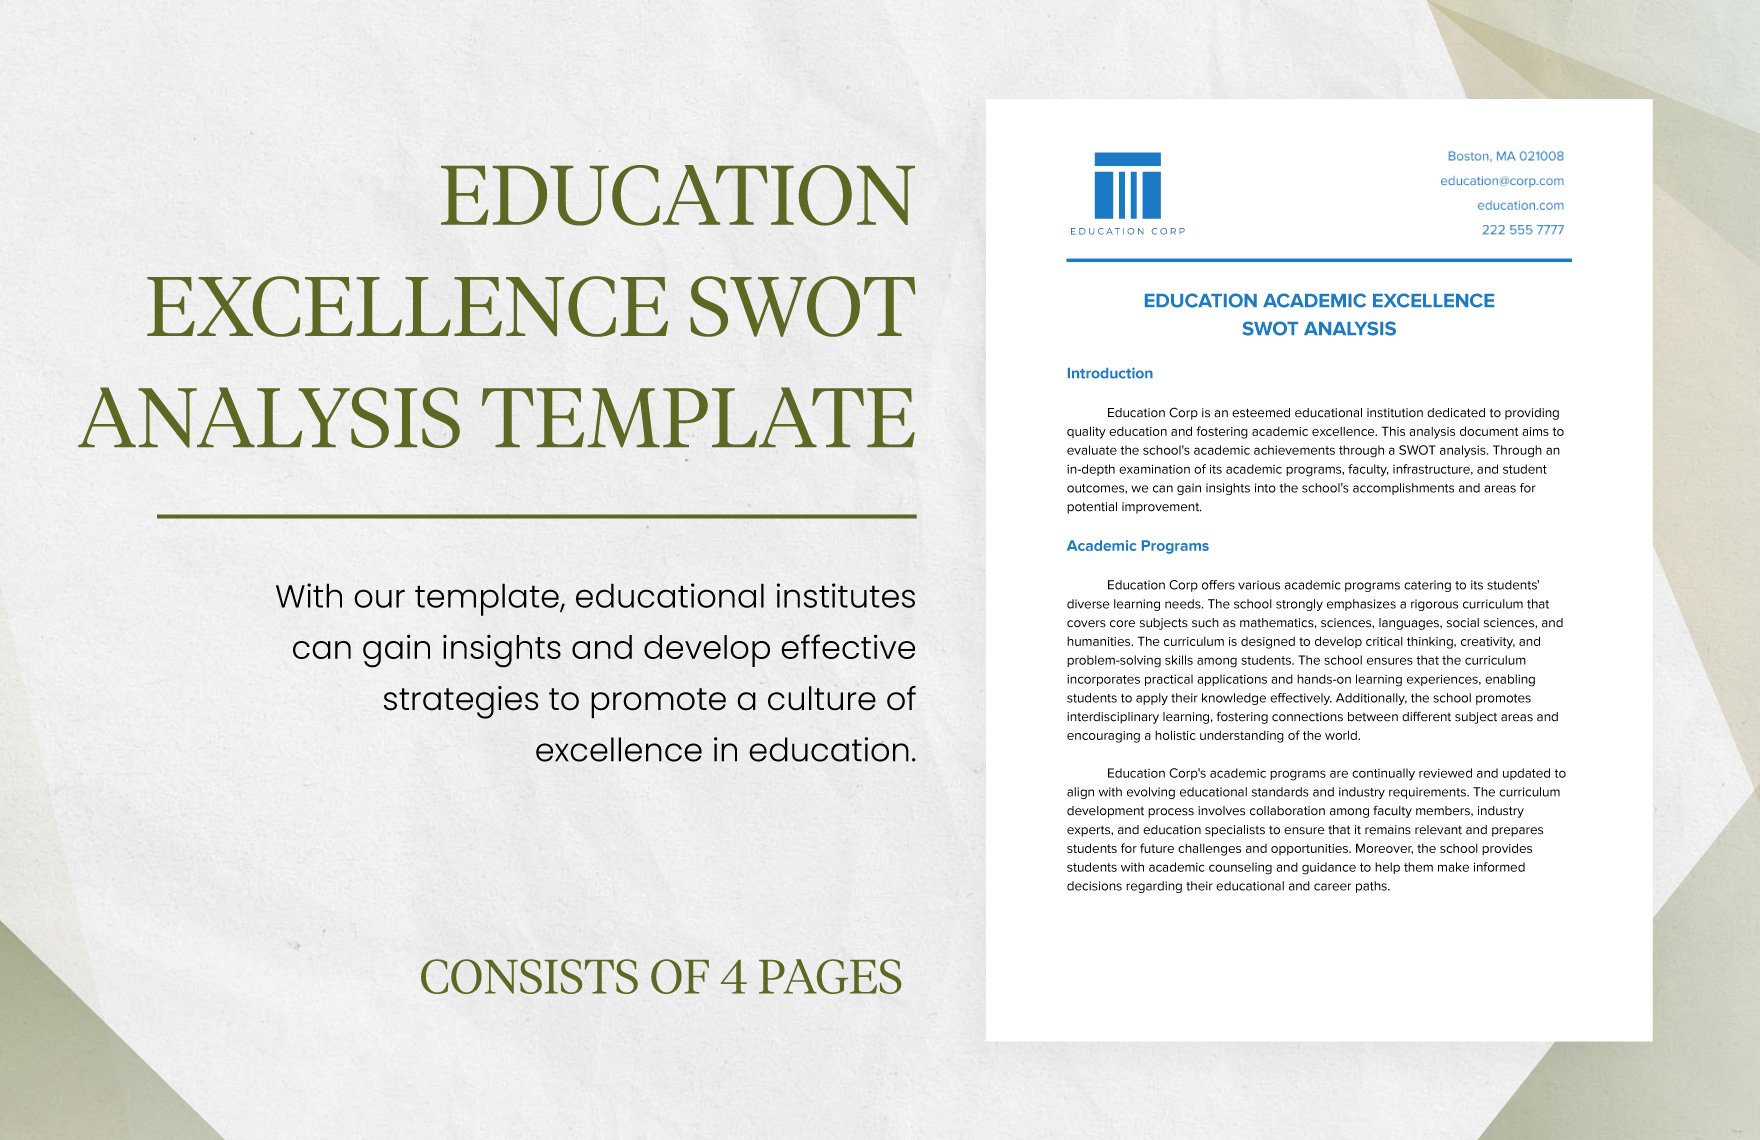 Education Academic Excellence SWOT Analysis Template